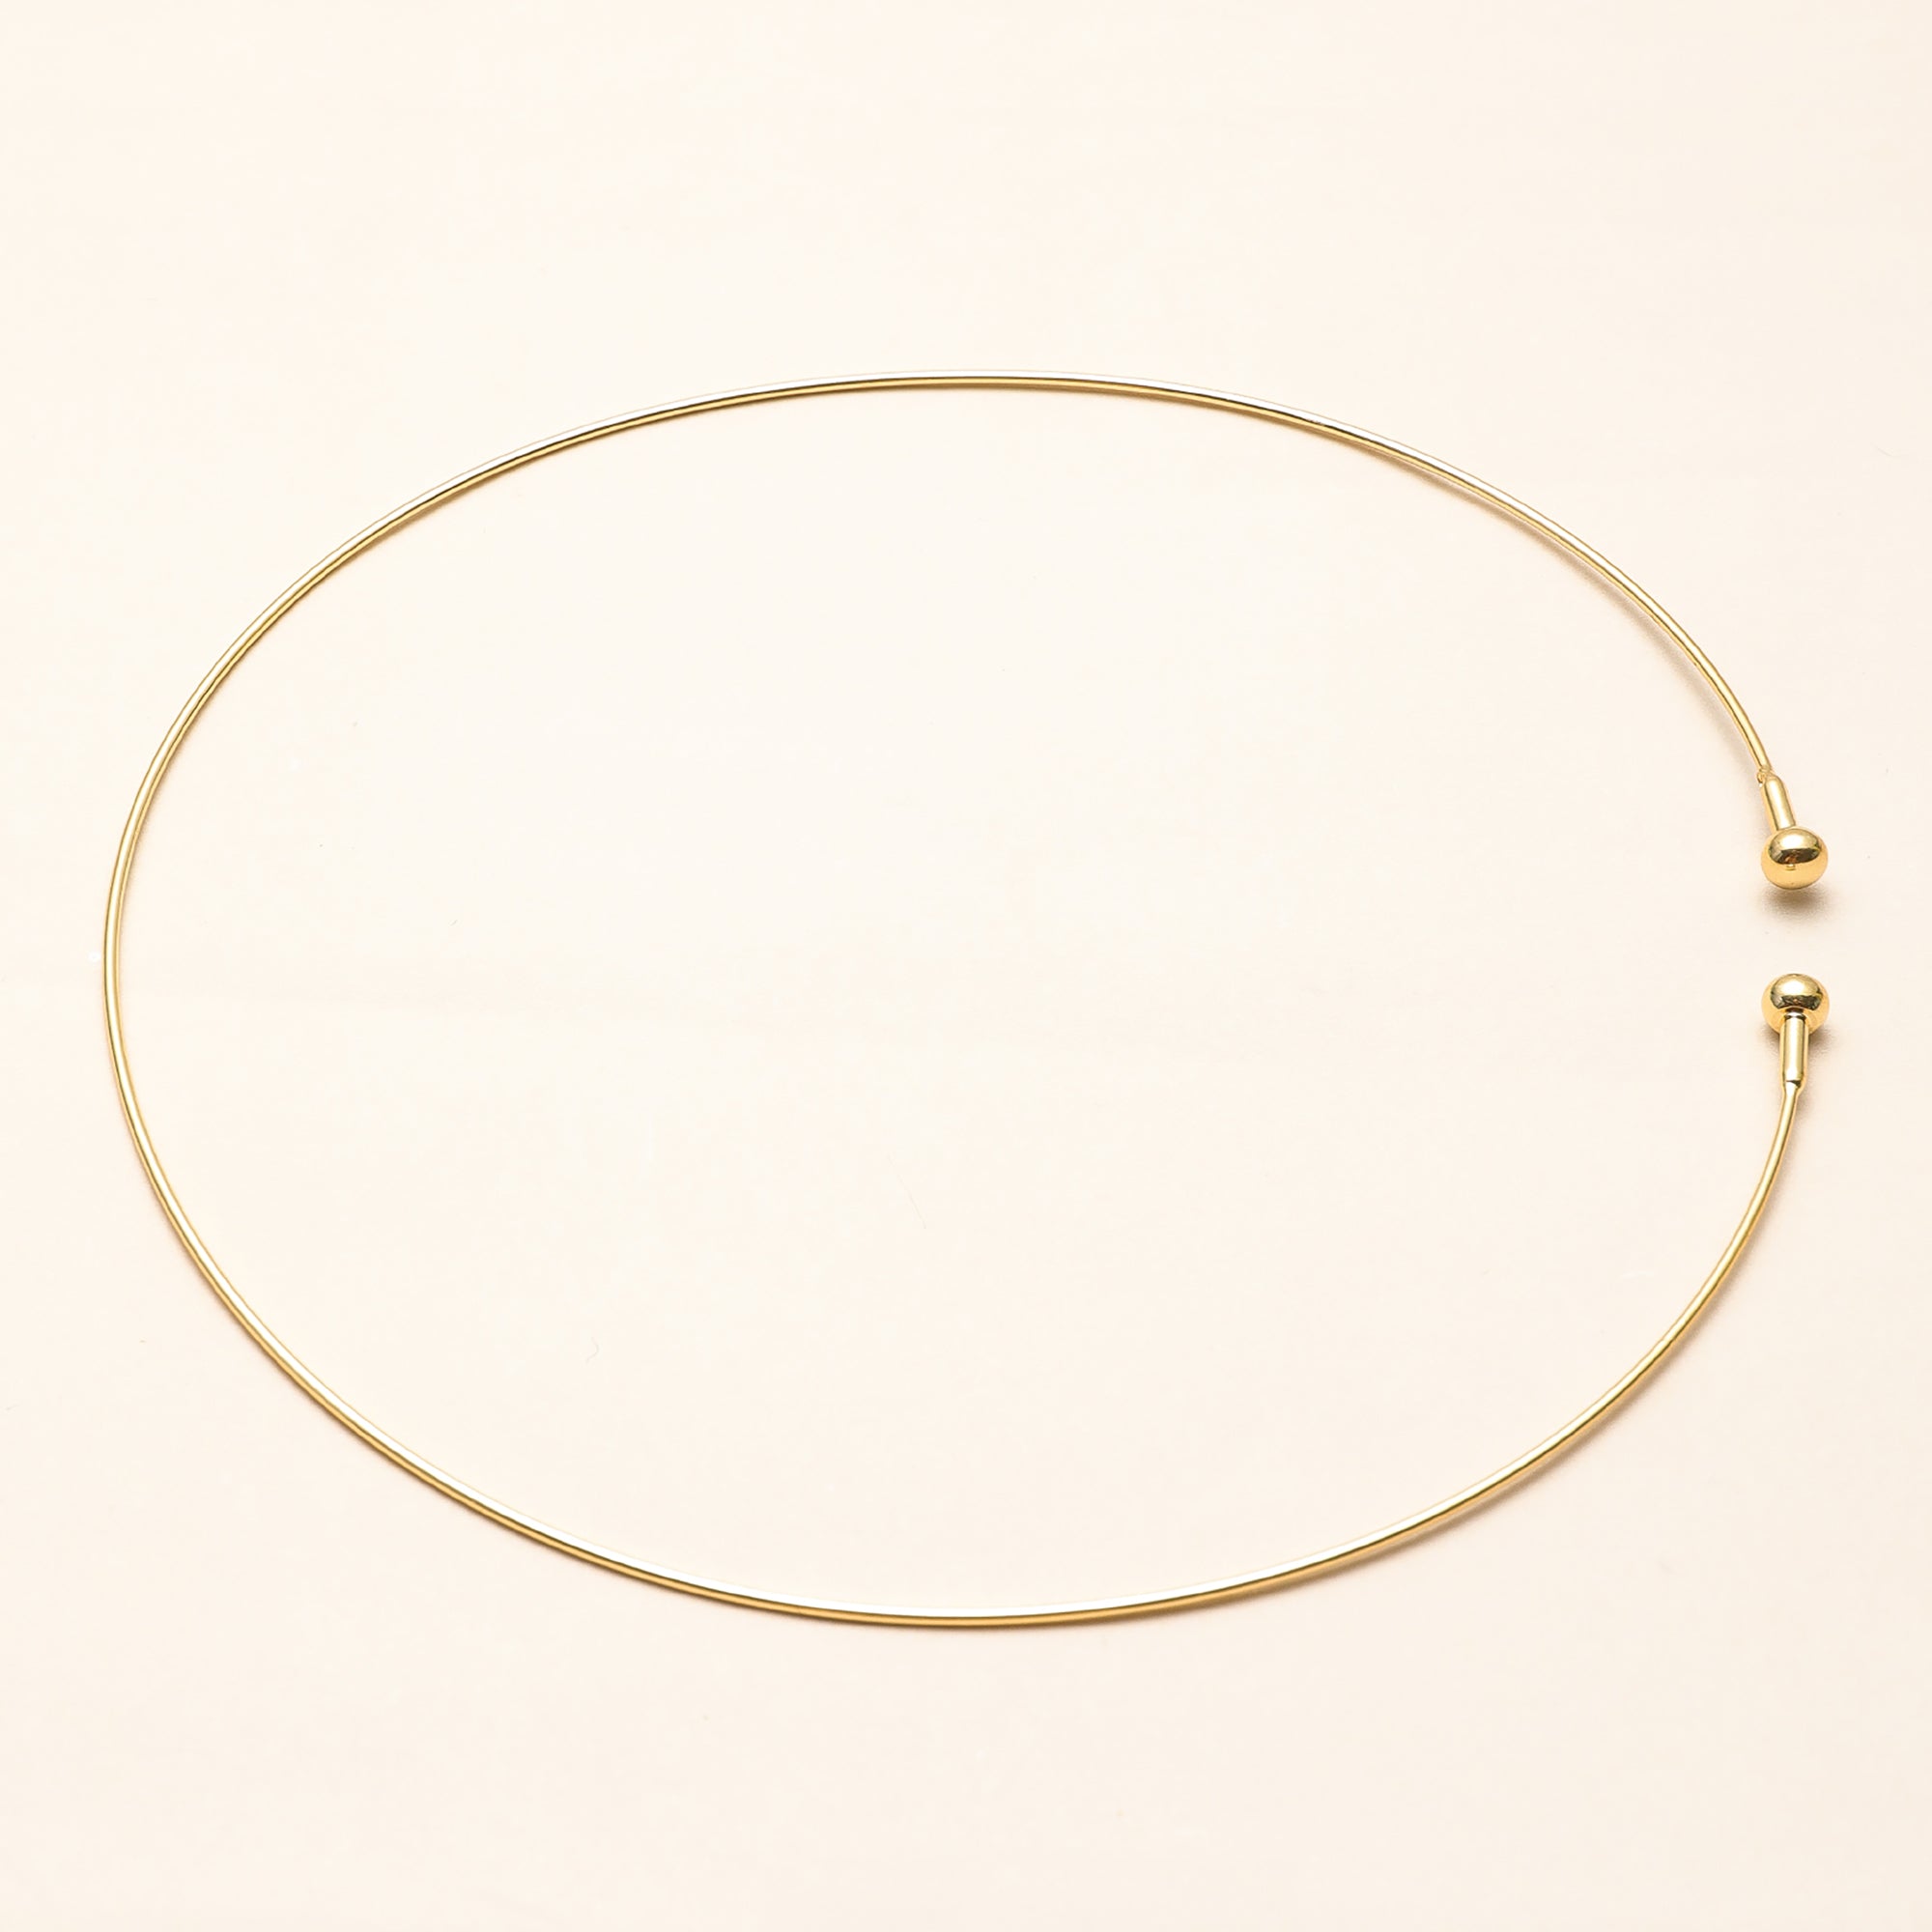 Gold Plated Choker Necklace Gift wedding influencer styling KOL / Youtuber / Celebrity / Fashion Icon picked